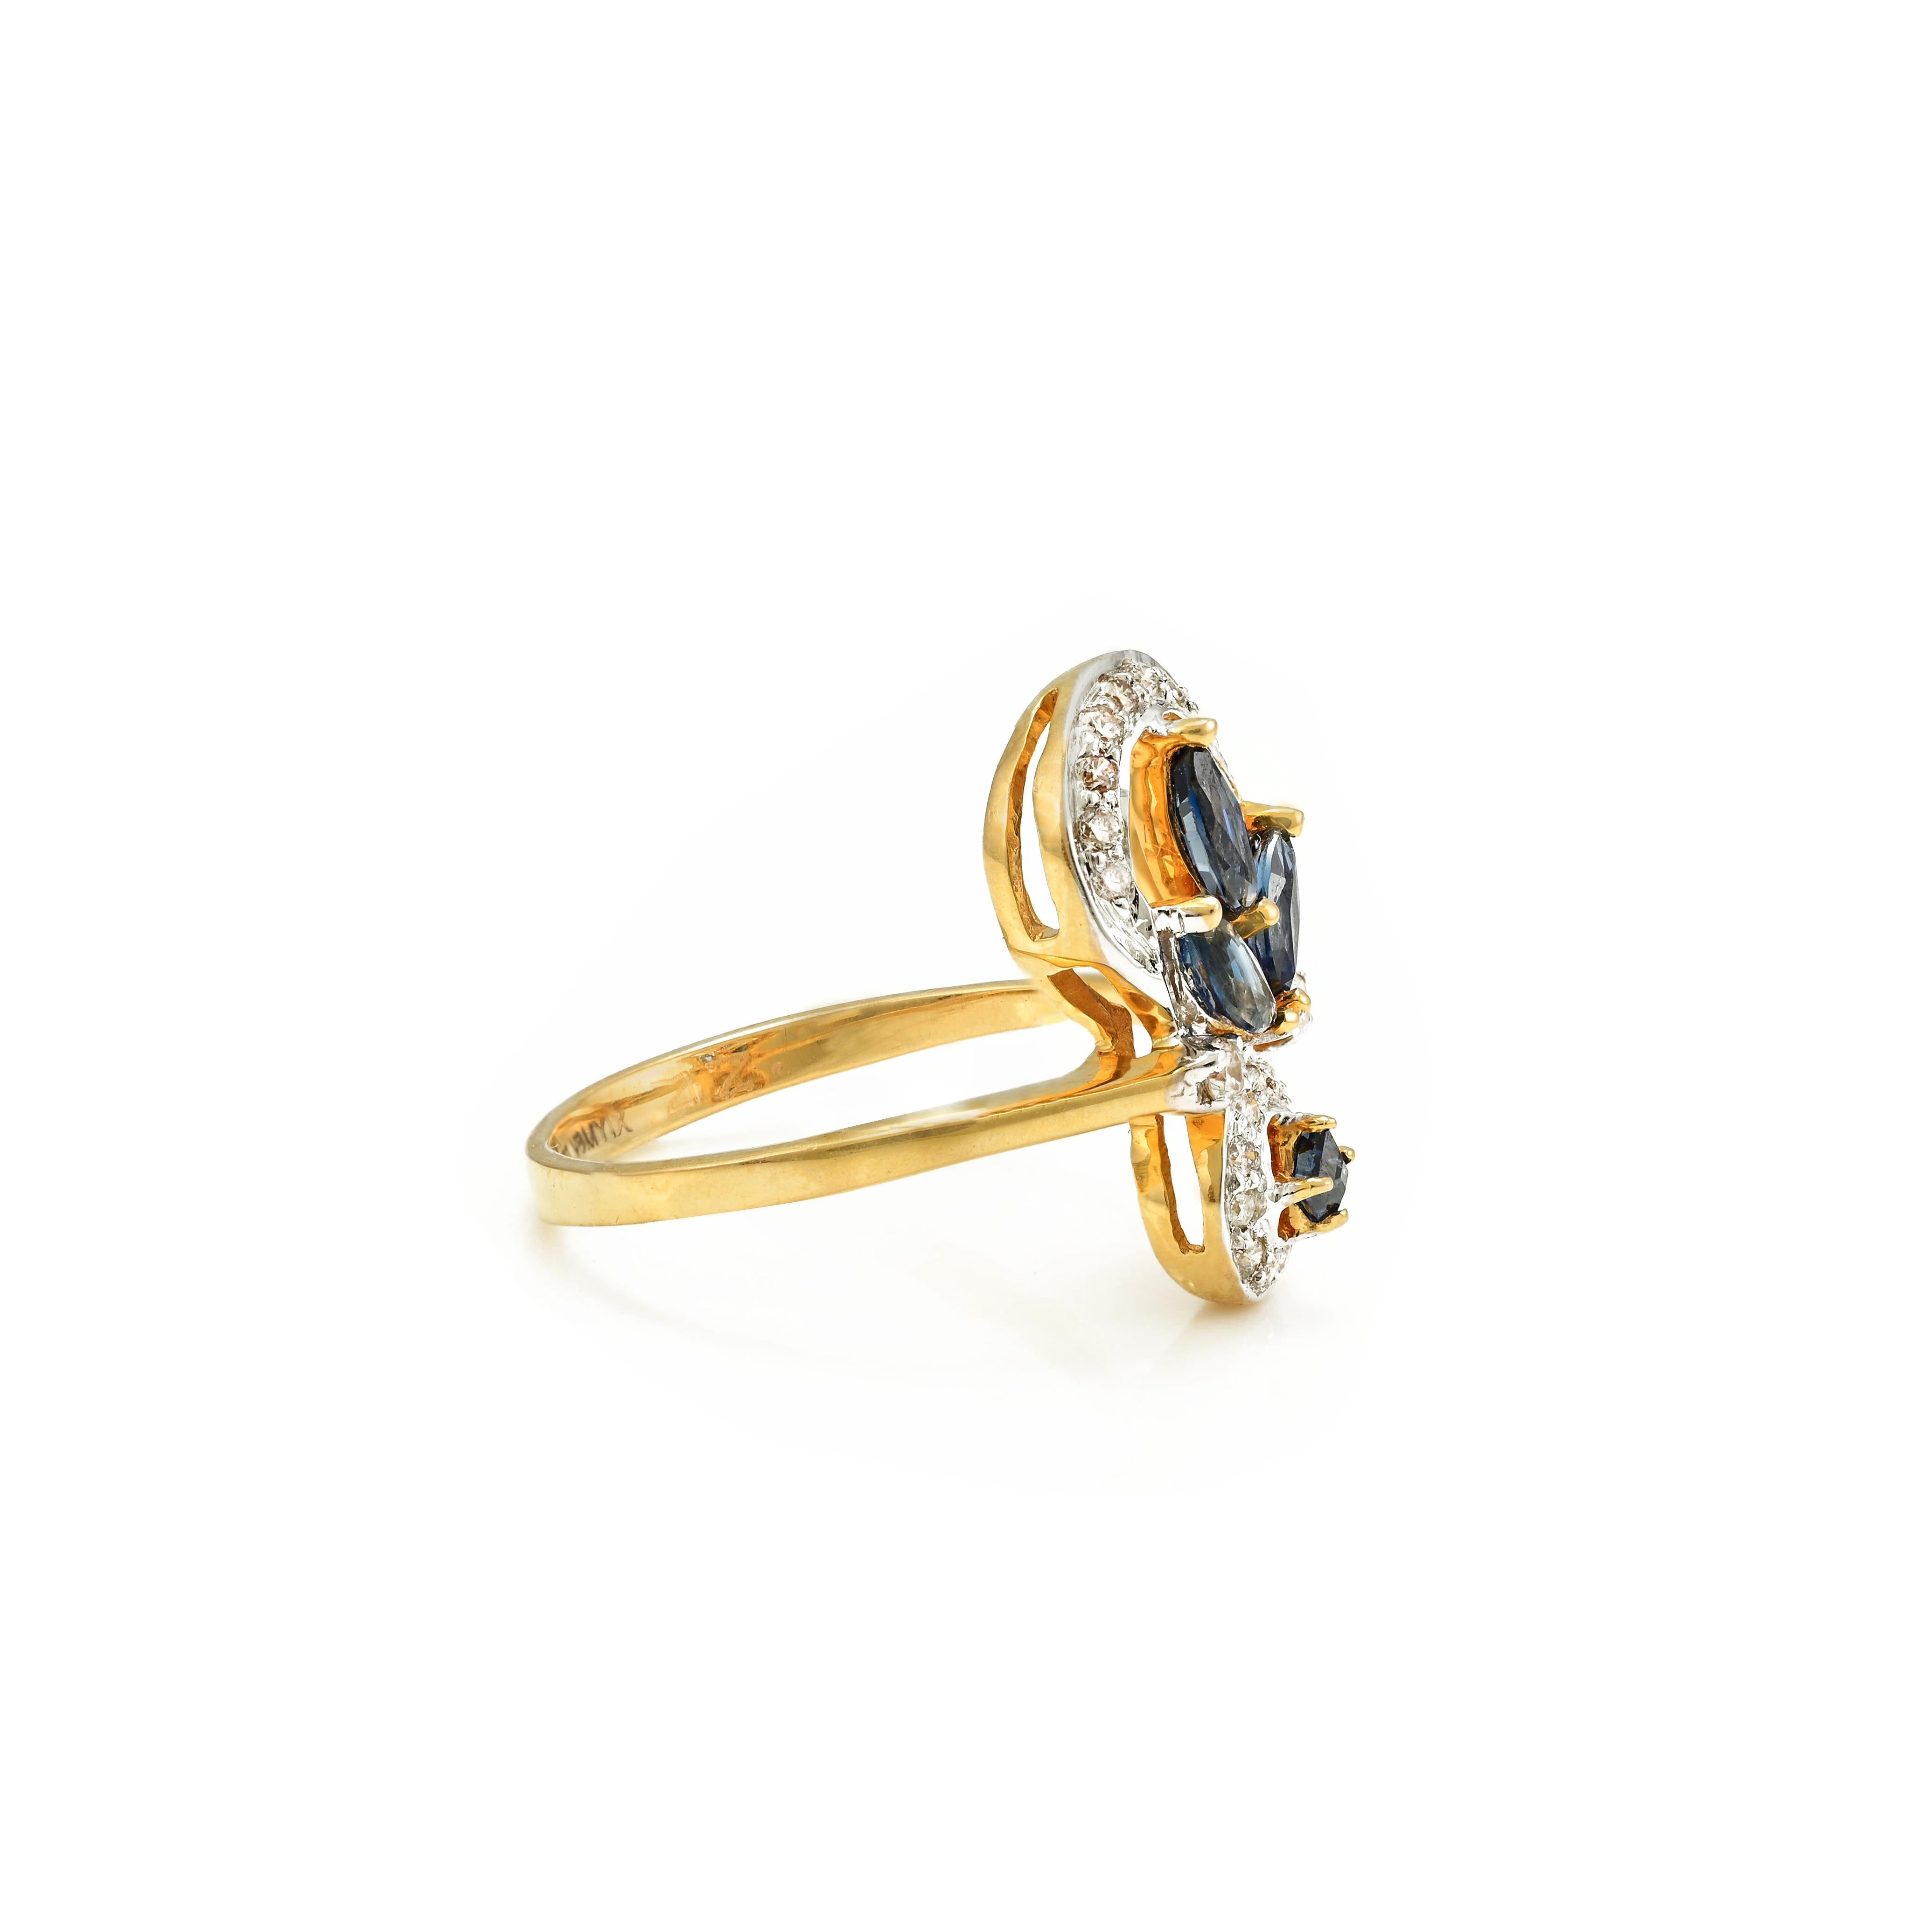 For Sale:  18k Solid Yellow Gold Contemporary Diamond and Blue Sapphire Statement Ring 4